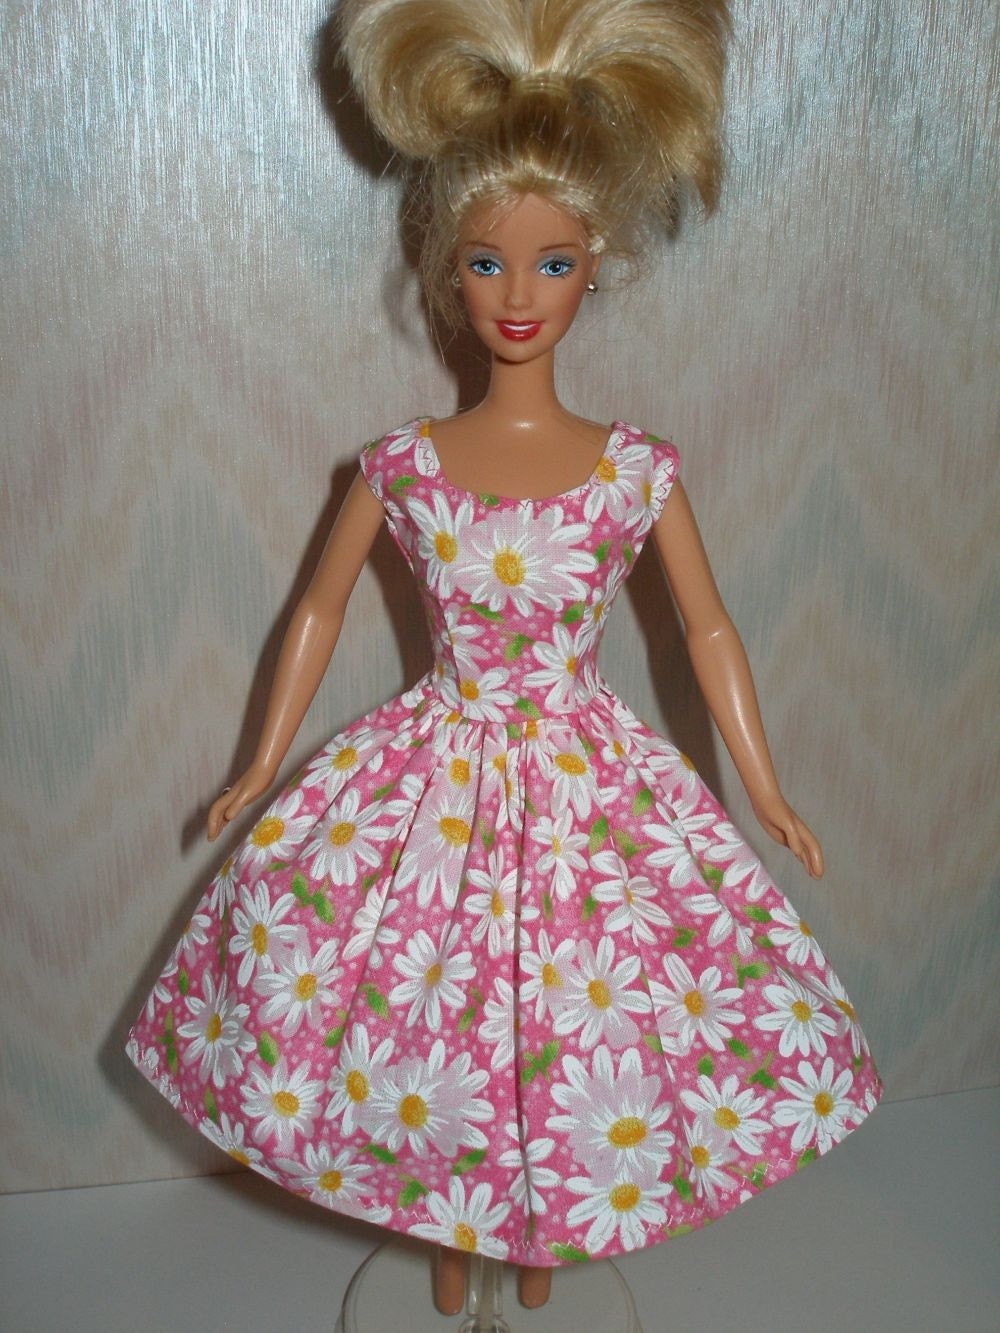 Handmade Barbie doll clothes pink and white daisy print